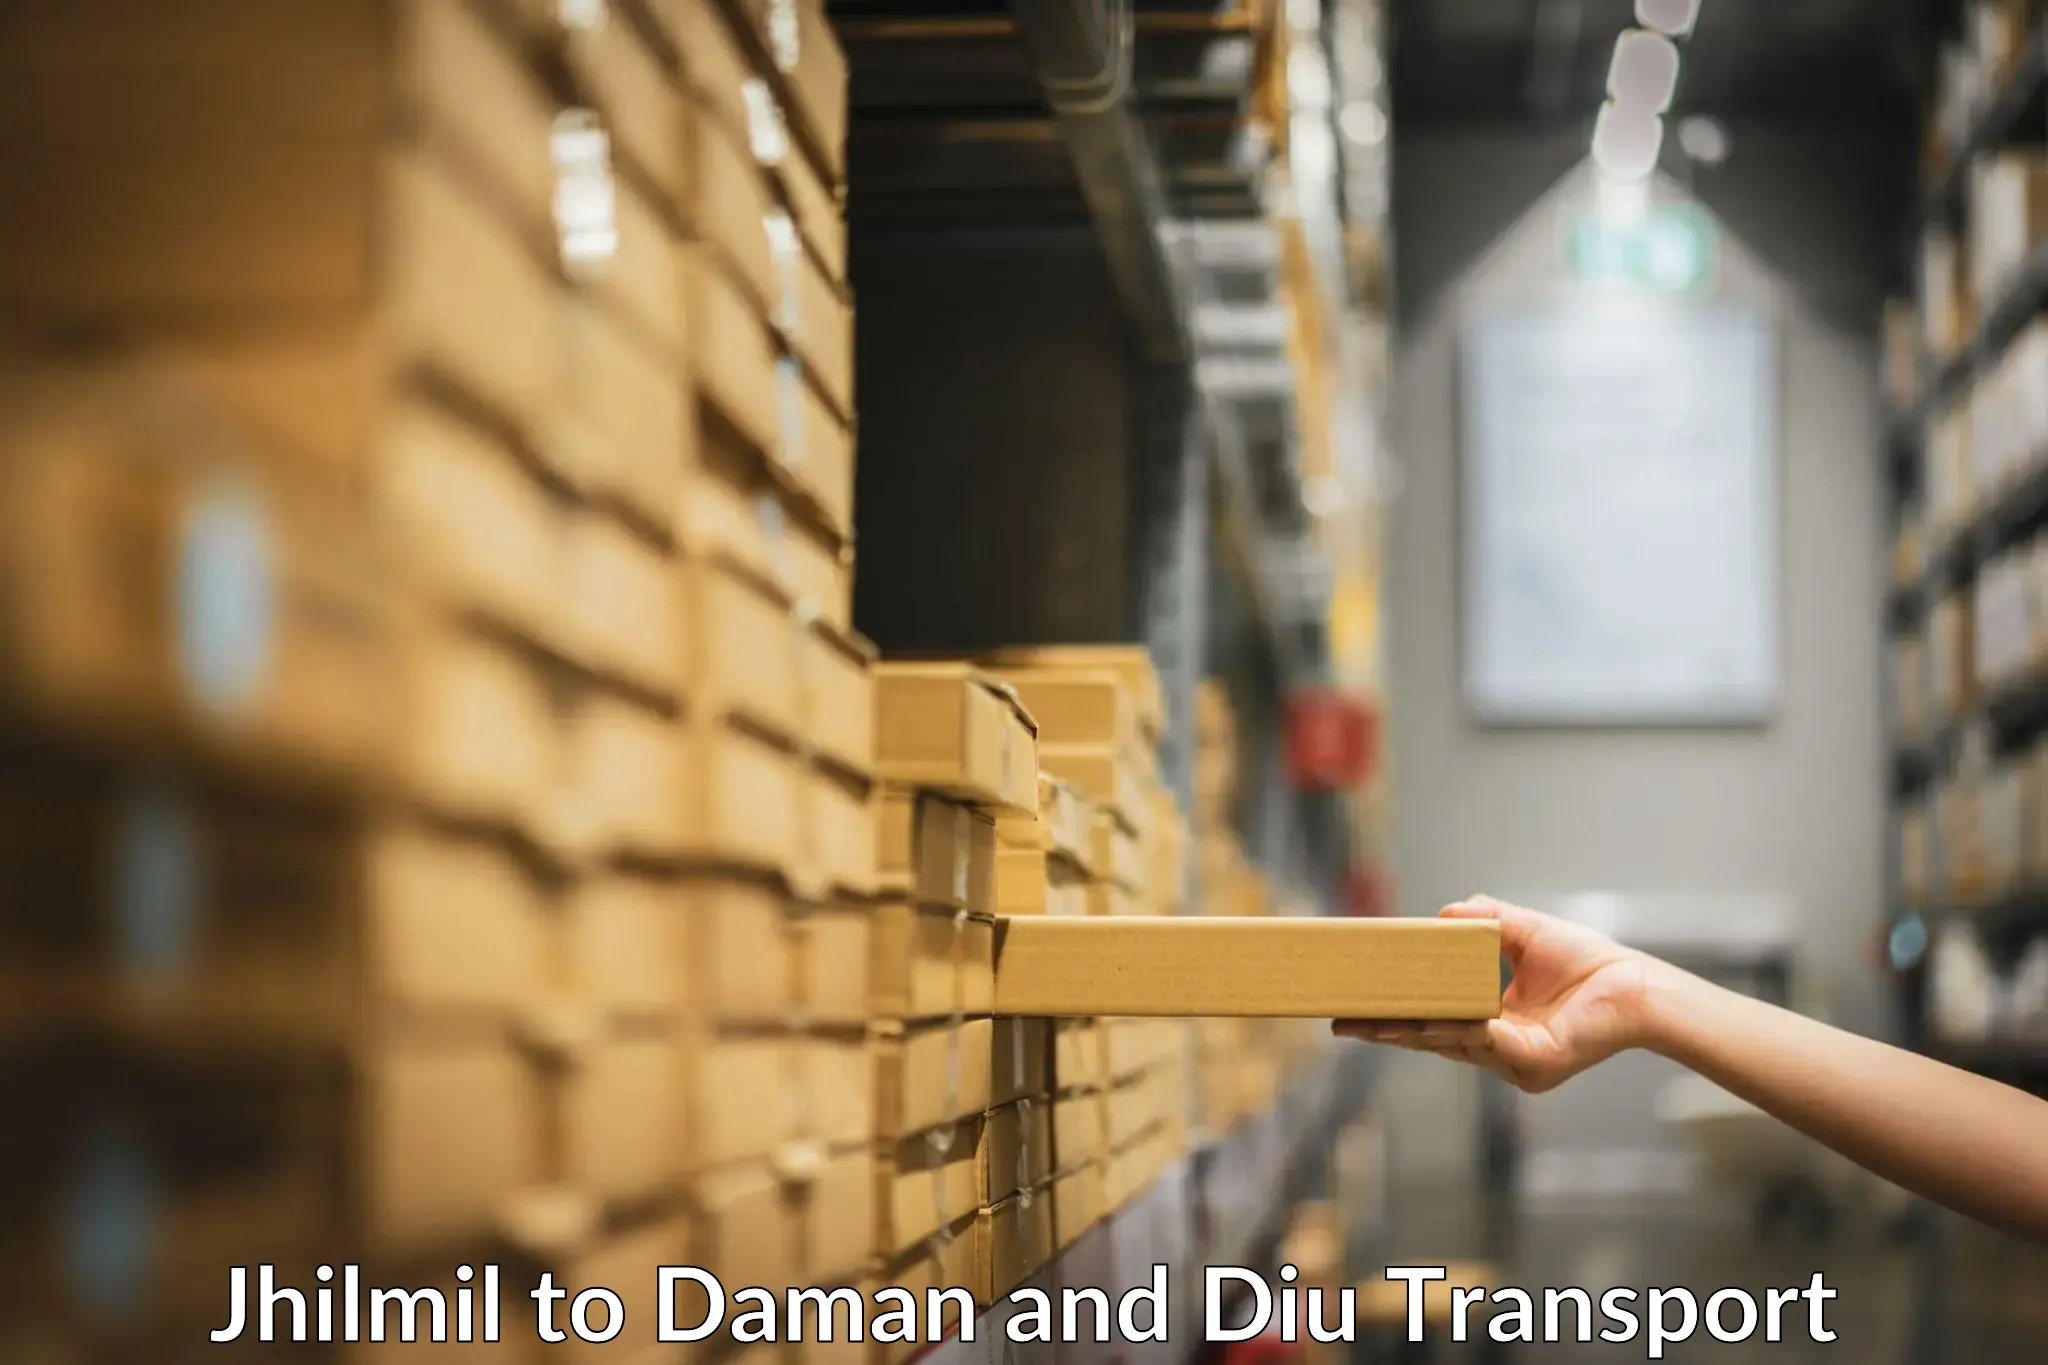 Truck transport companies in India Jhilmil to Daman